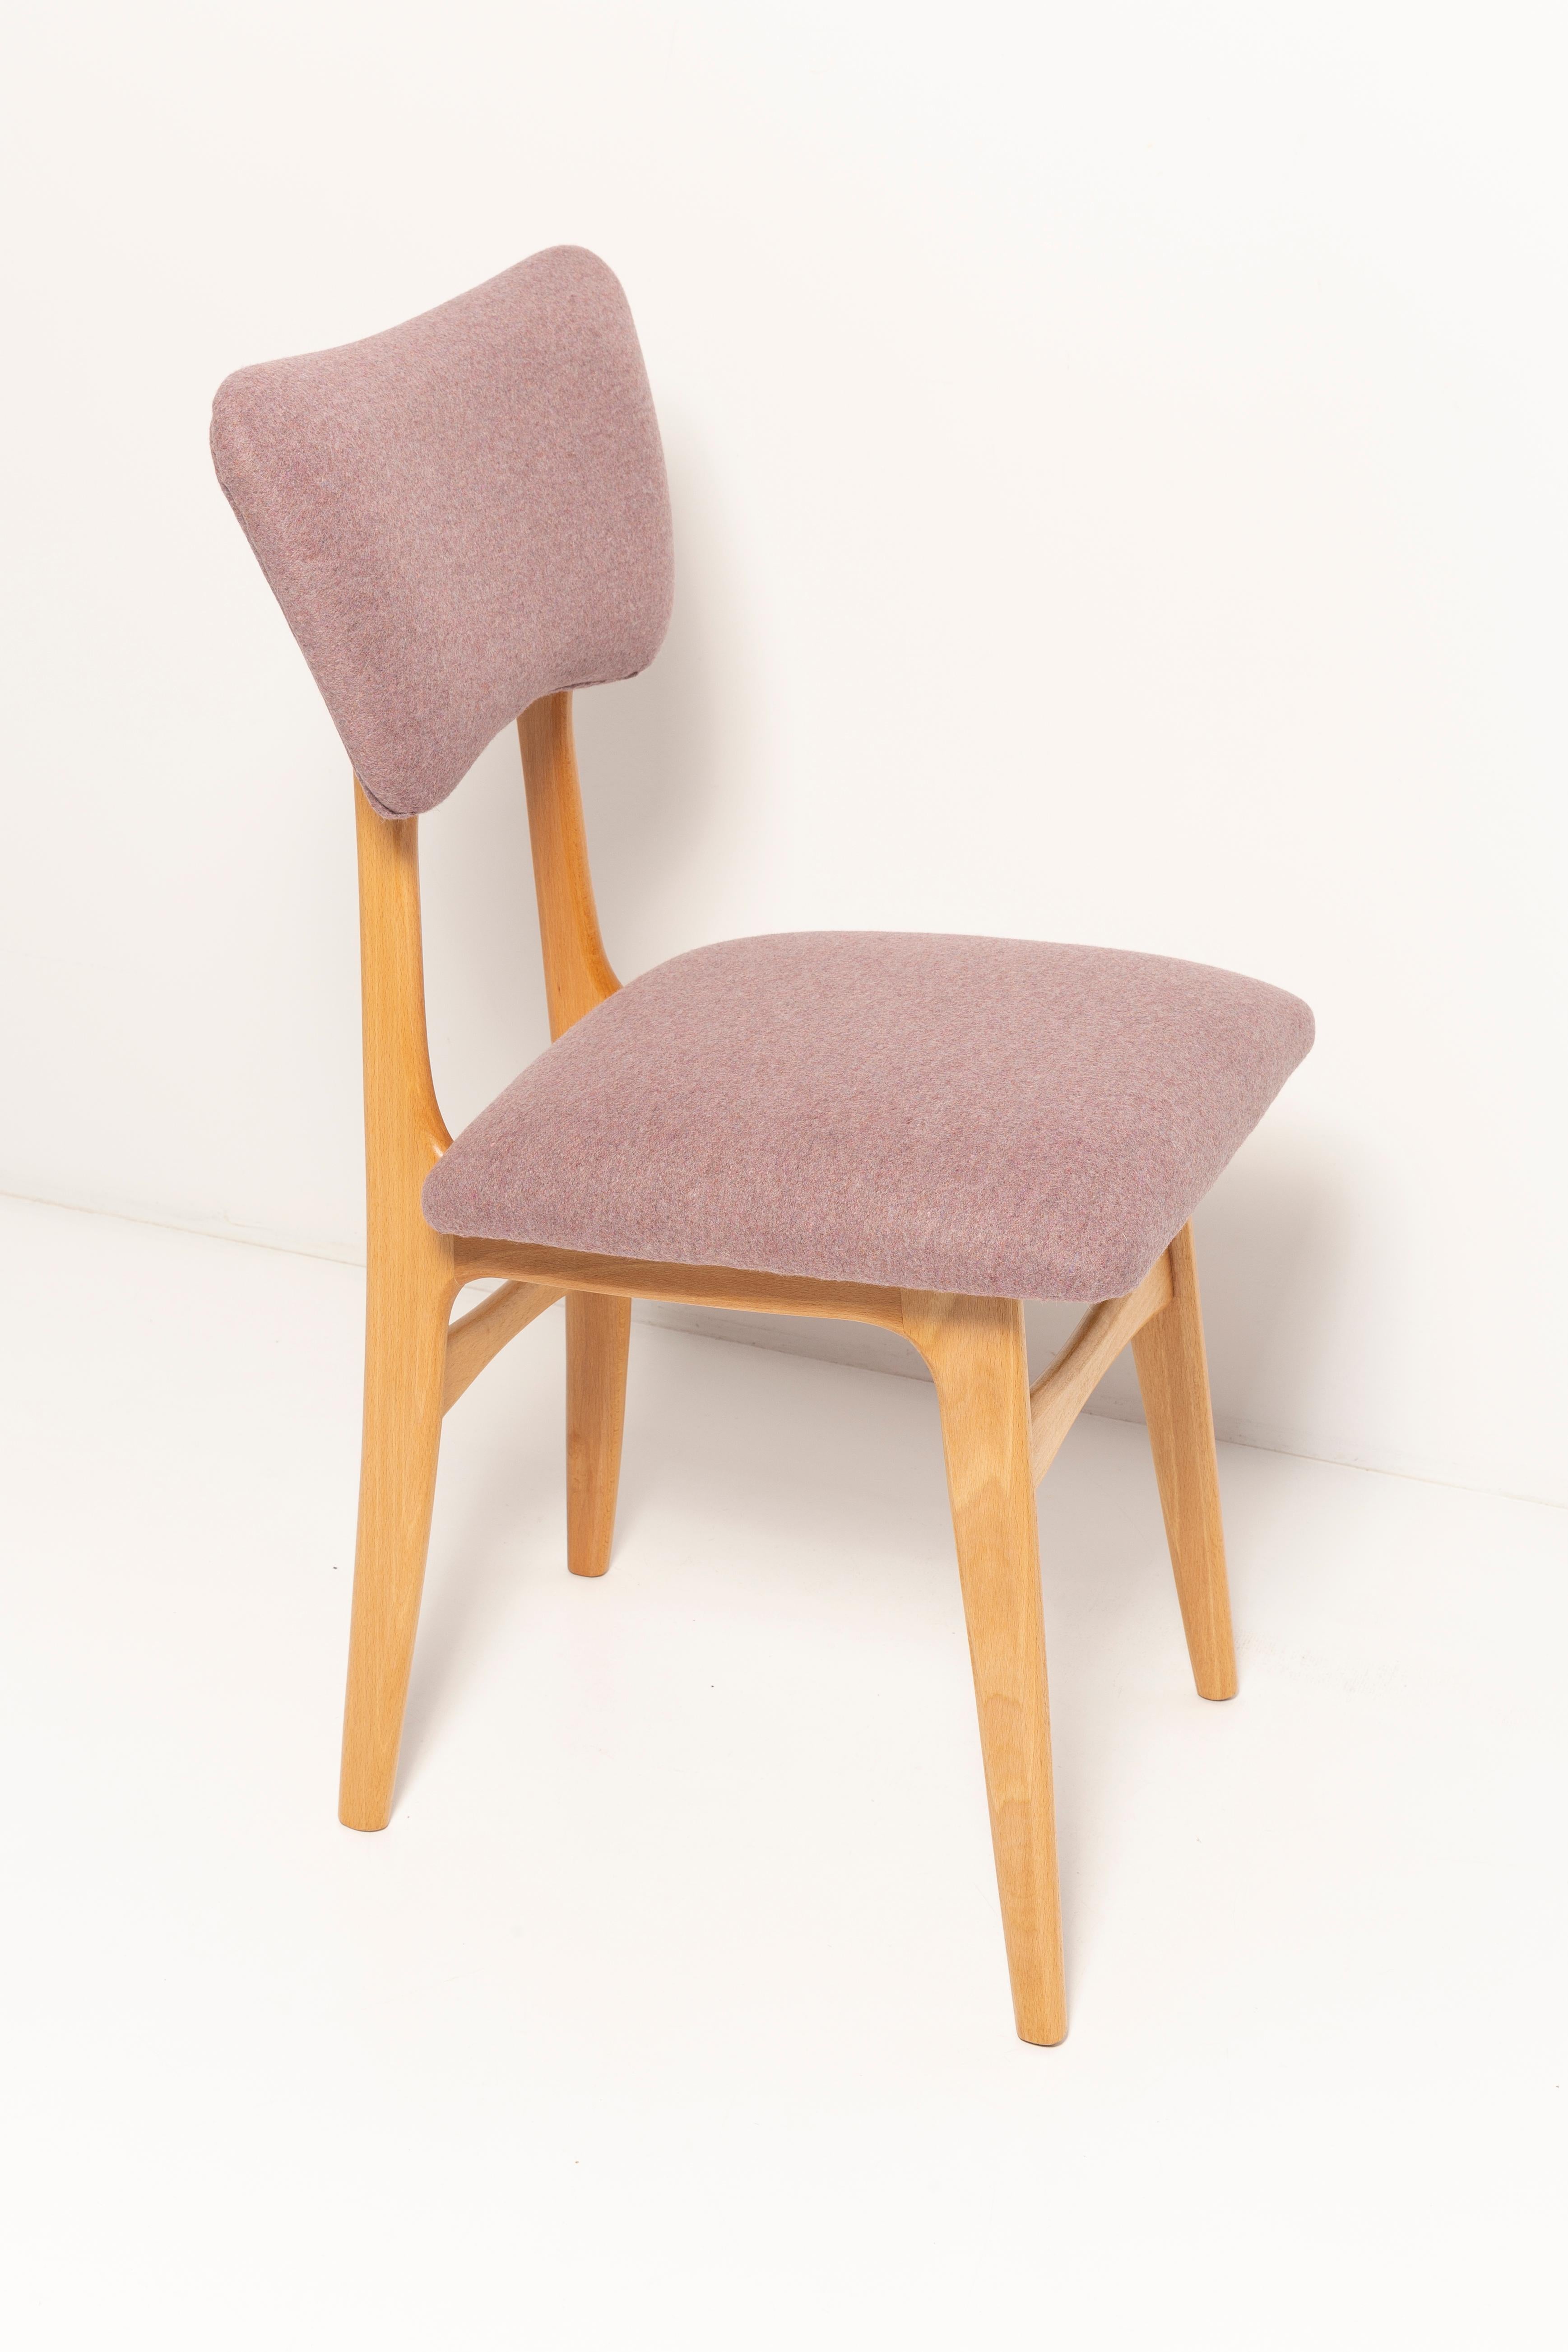 Mid-Century Modern 20th Century Butterfly Dining Chair, Pink Wool, Light Wood, Europe, 1960s For Sale